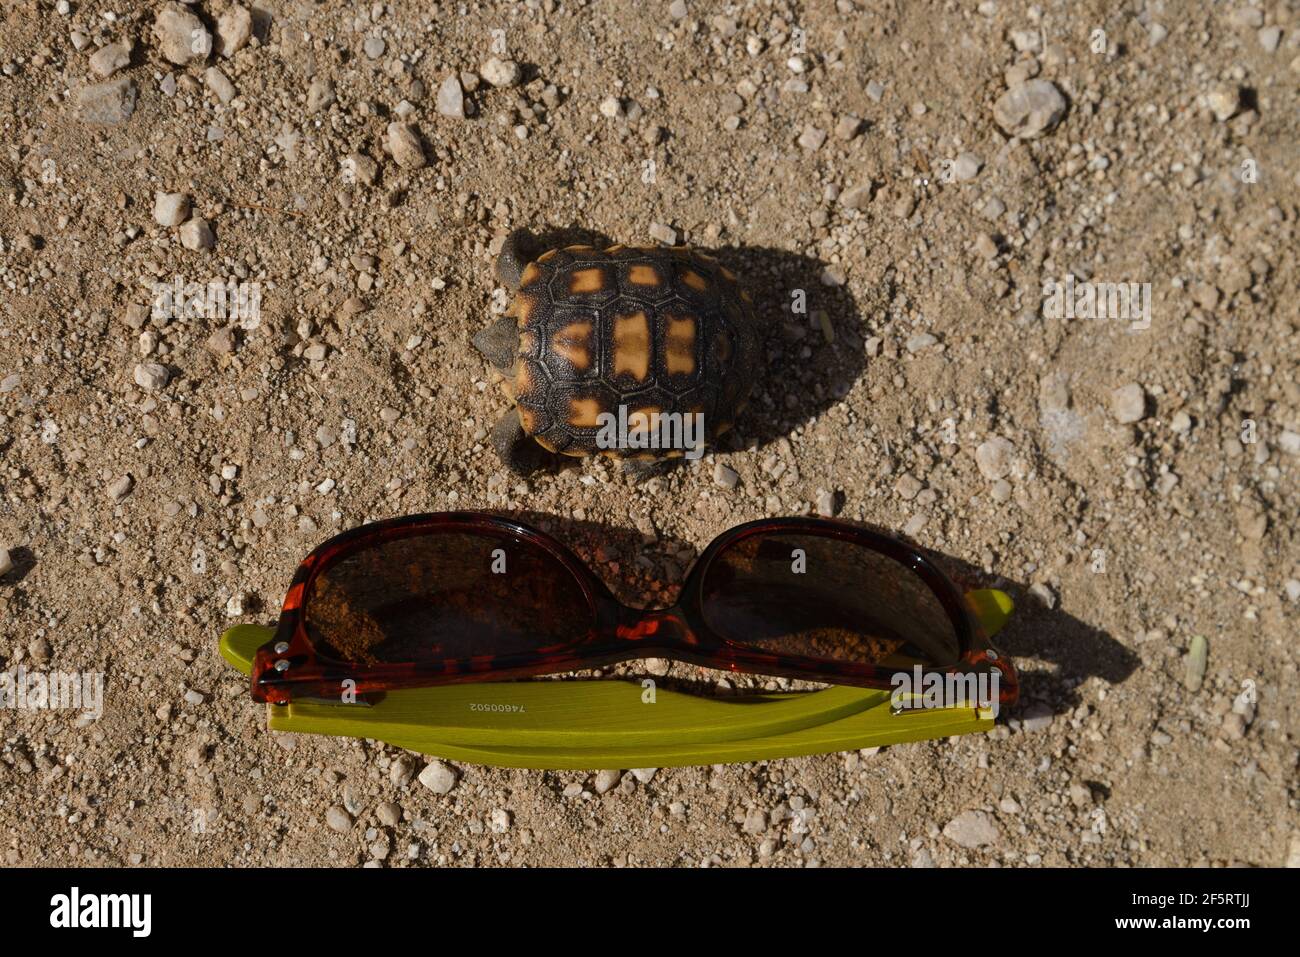 A recently hatched desert tortoise next to sunglasses for size comparison, Sonoran Desert, Catalina, Arizona, USA. Stock Photo